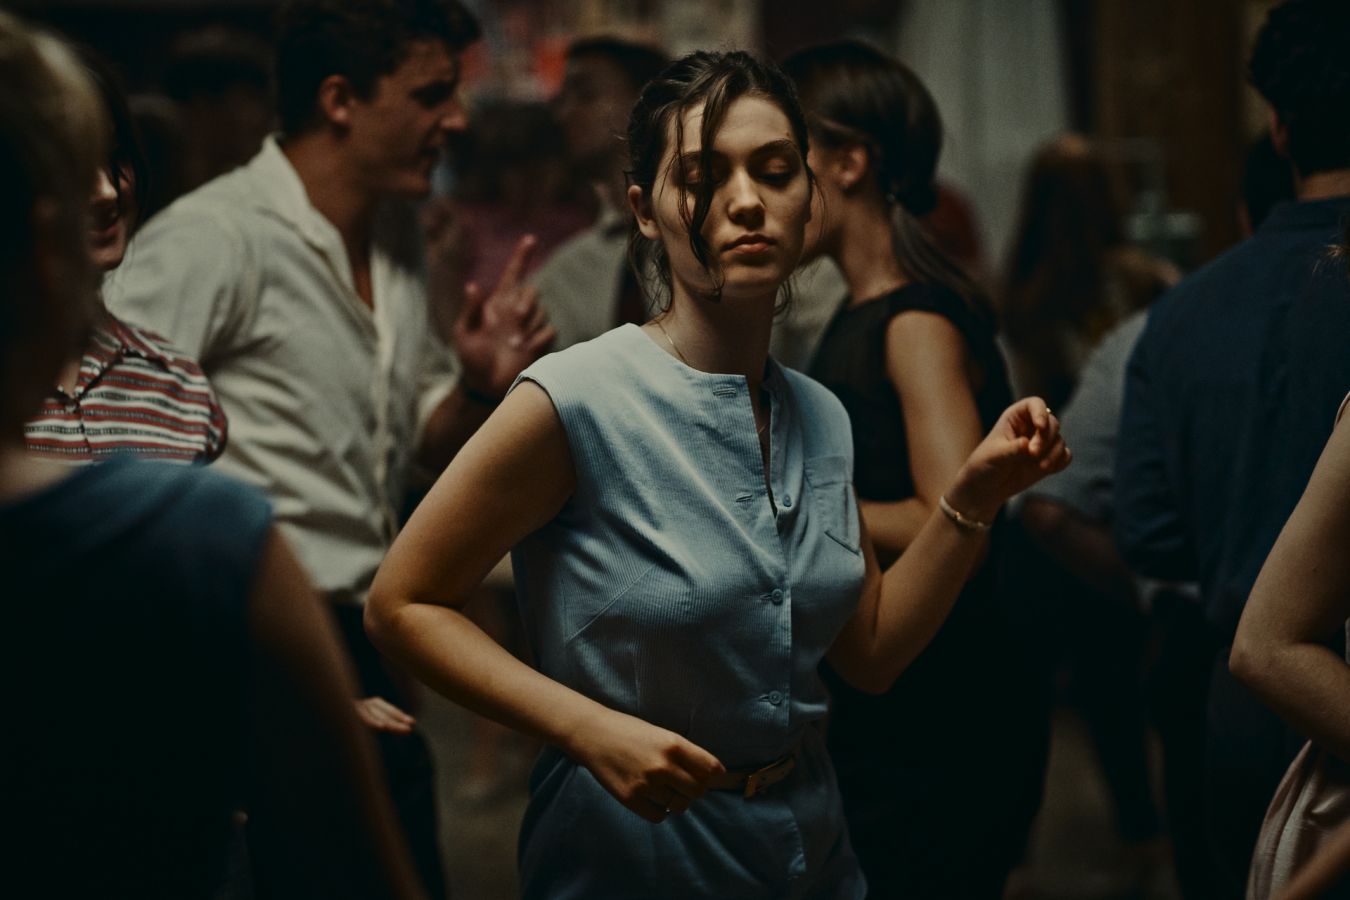 Anamaria Vartolomei
as ‘Anne’ in Audrey Diwan’s HAPPENING. Courtesy of IFC
Films. An IFC Films Release.